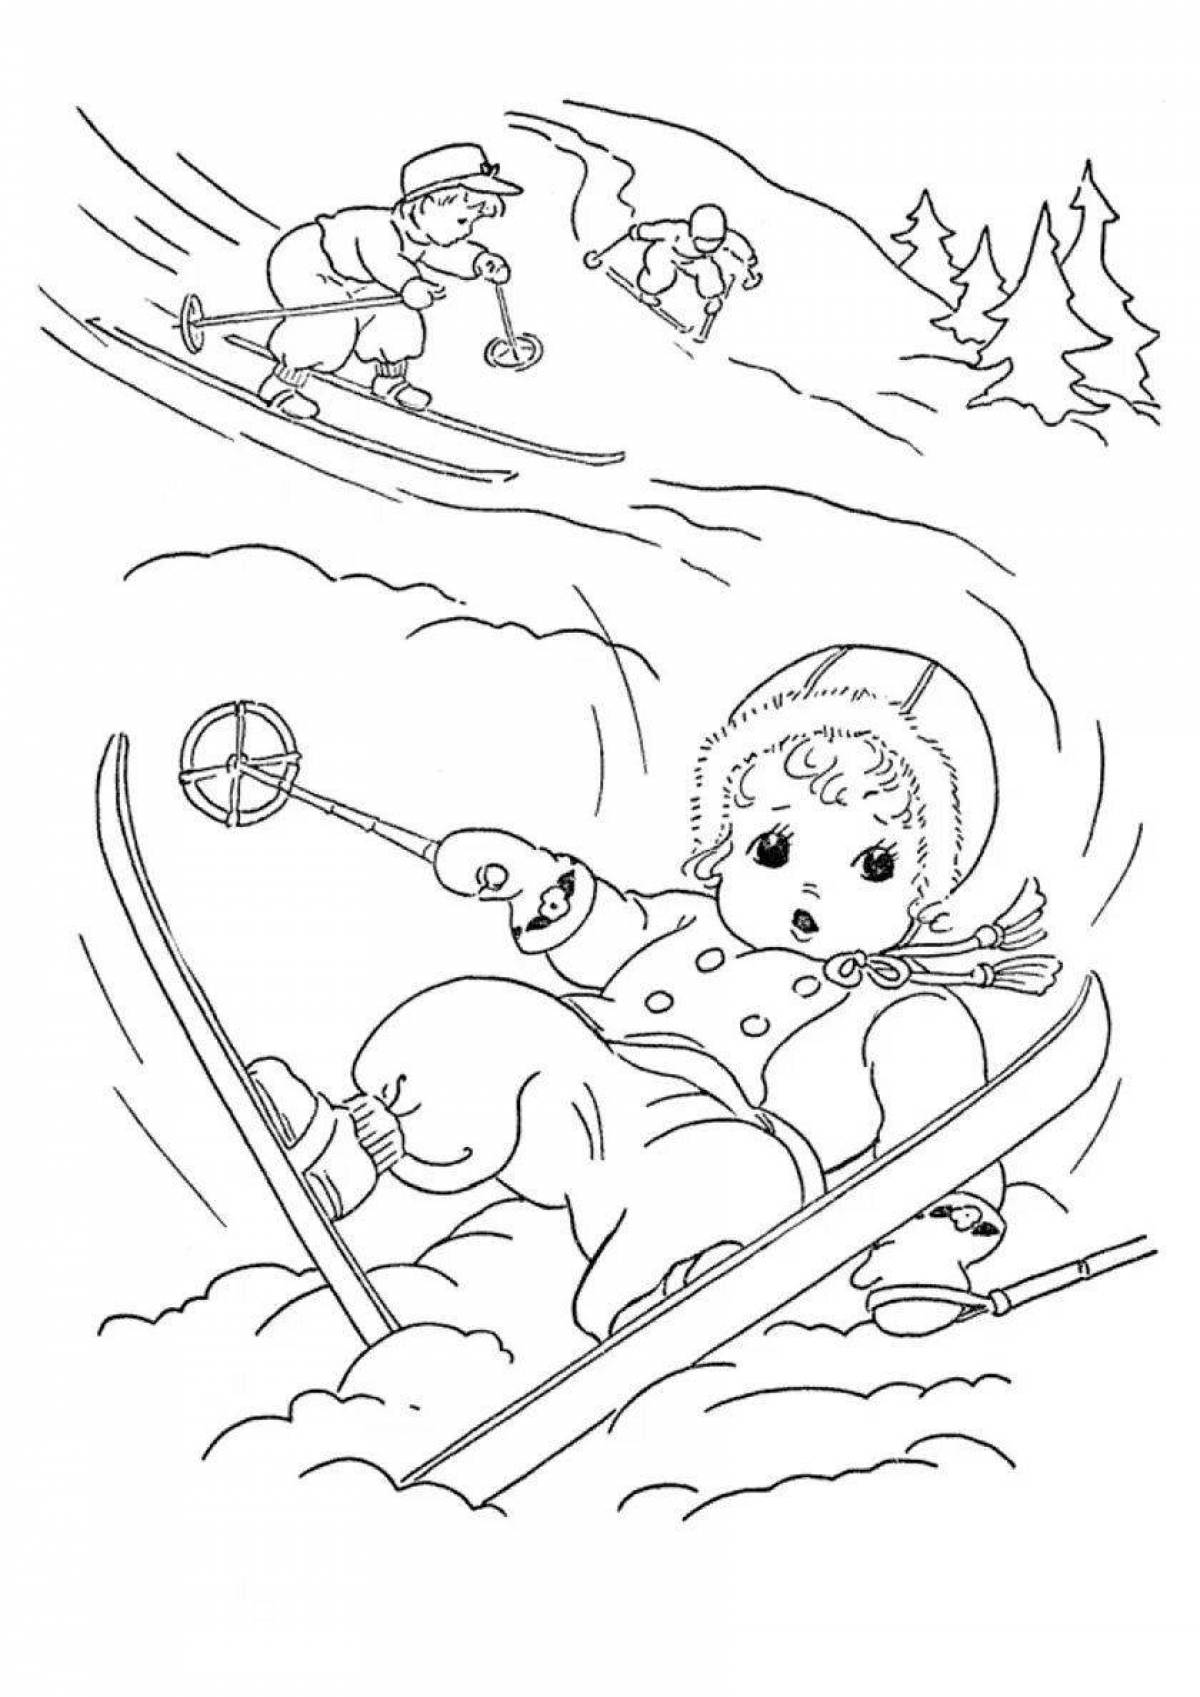 Coloring book inspiring winter safety rules